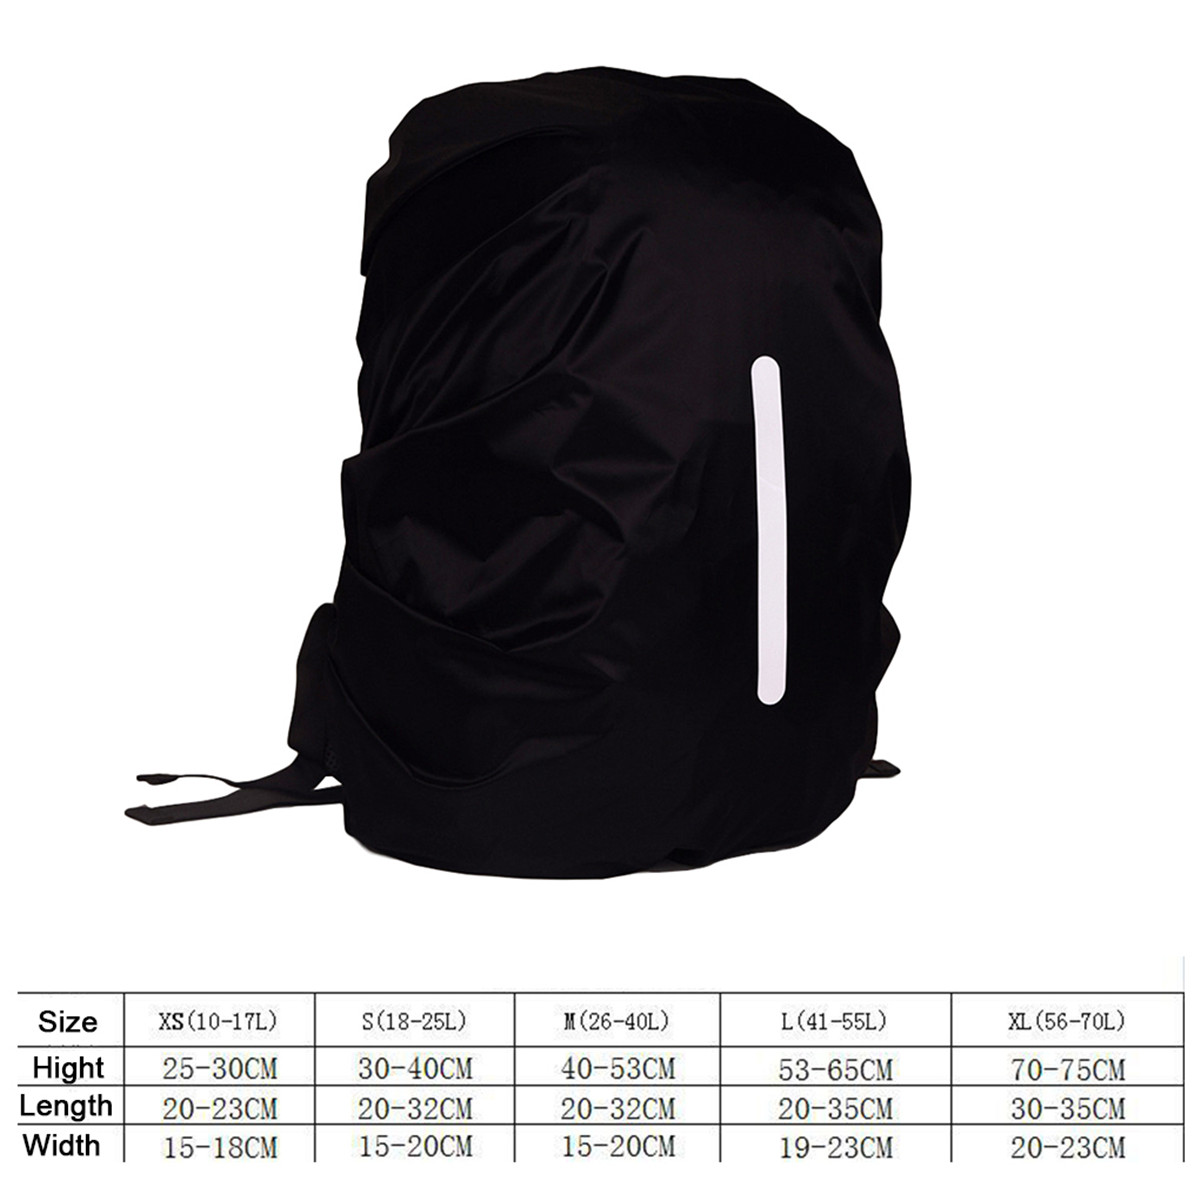 Portable-Outdoor-Backpack-Waterproof-Dust-Cover-Travel-Backpack-Rain-Cover-Hiking-Camping-Sports-Acc-1790124-11